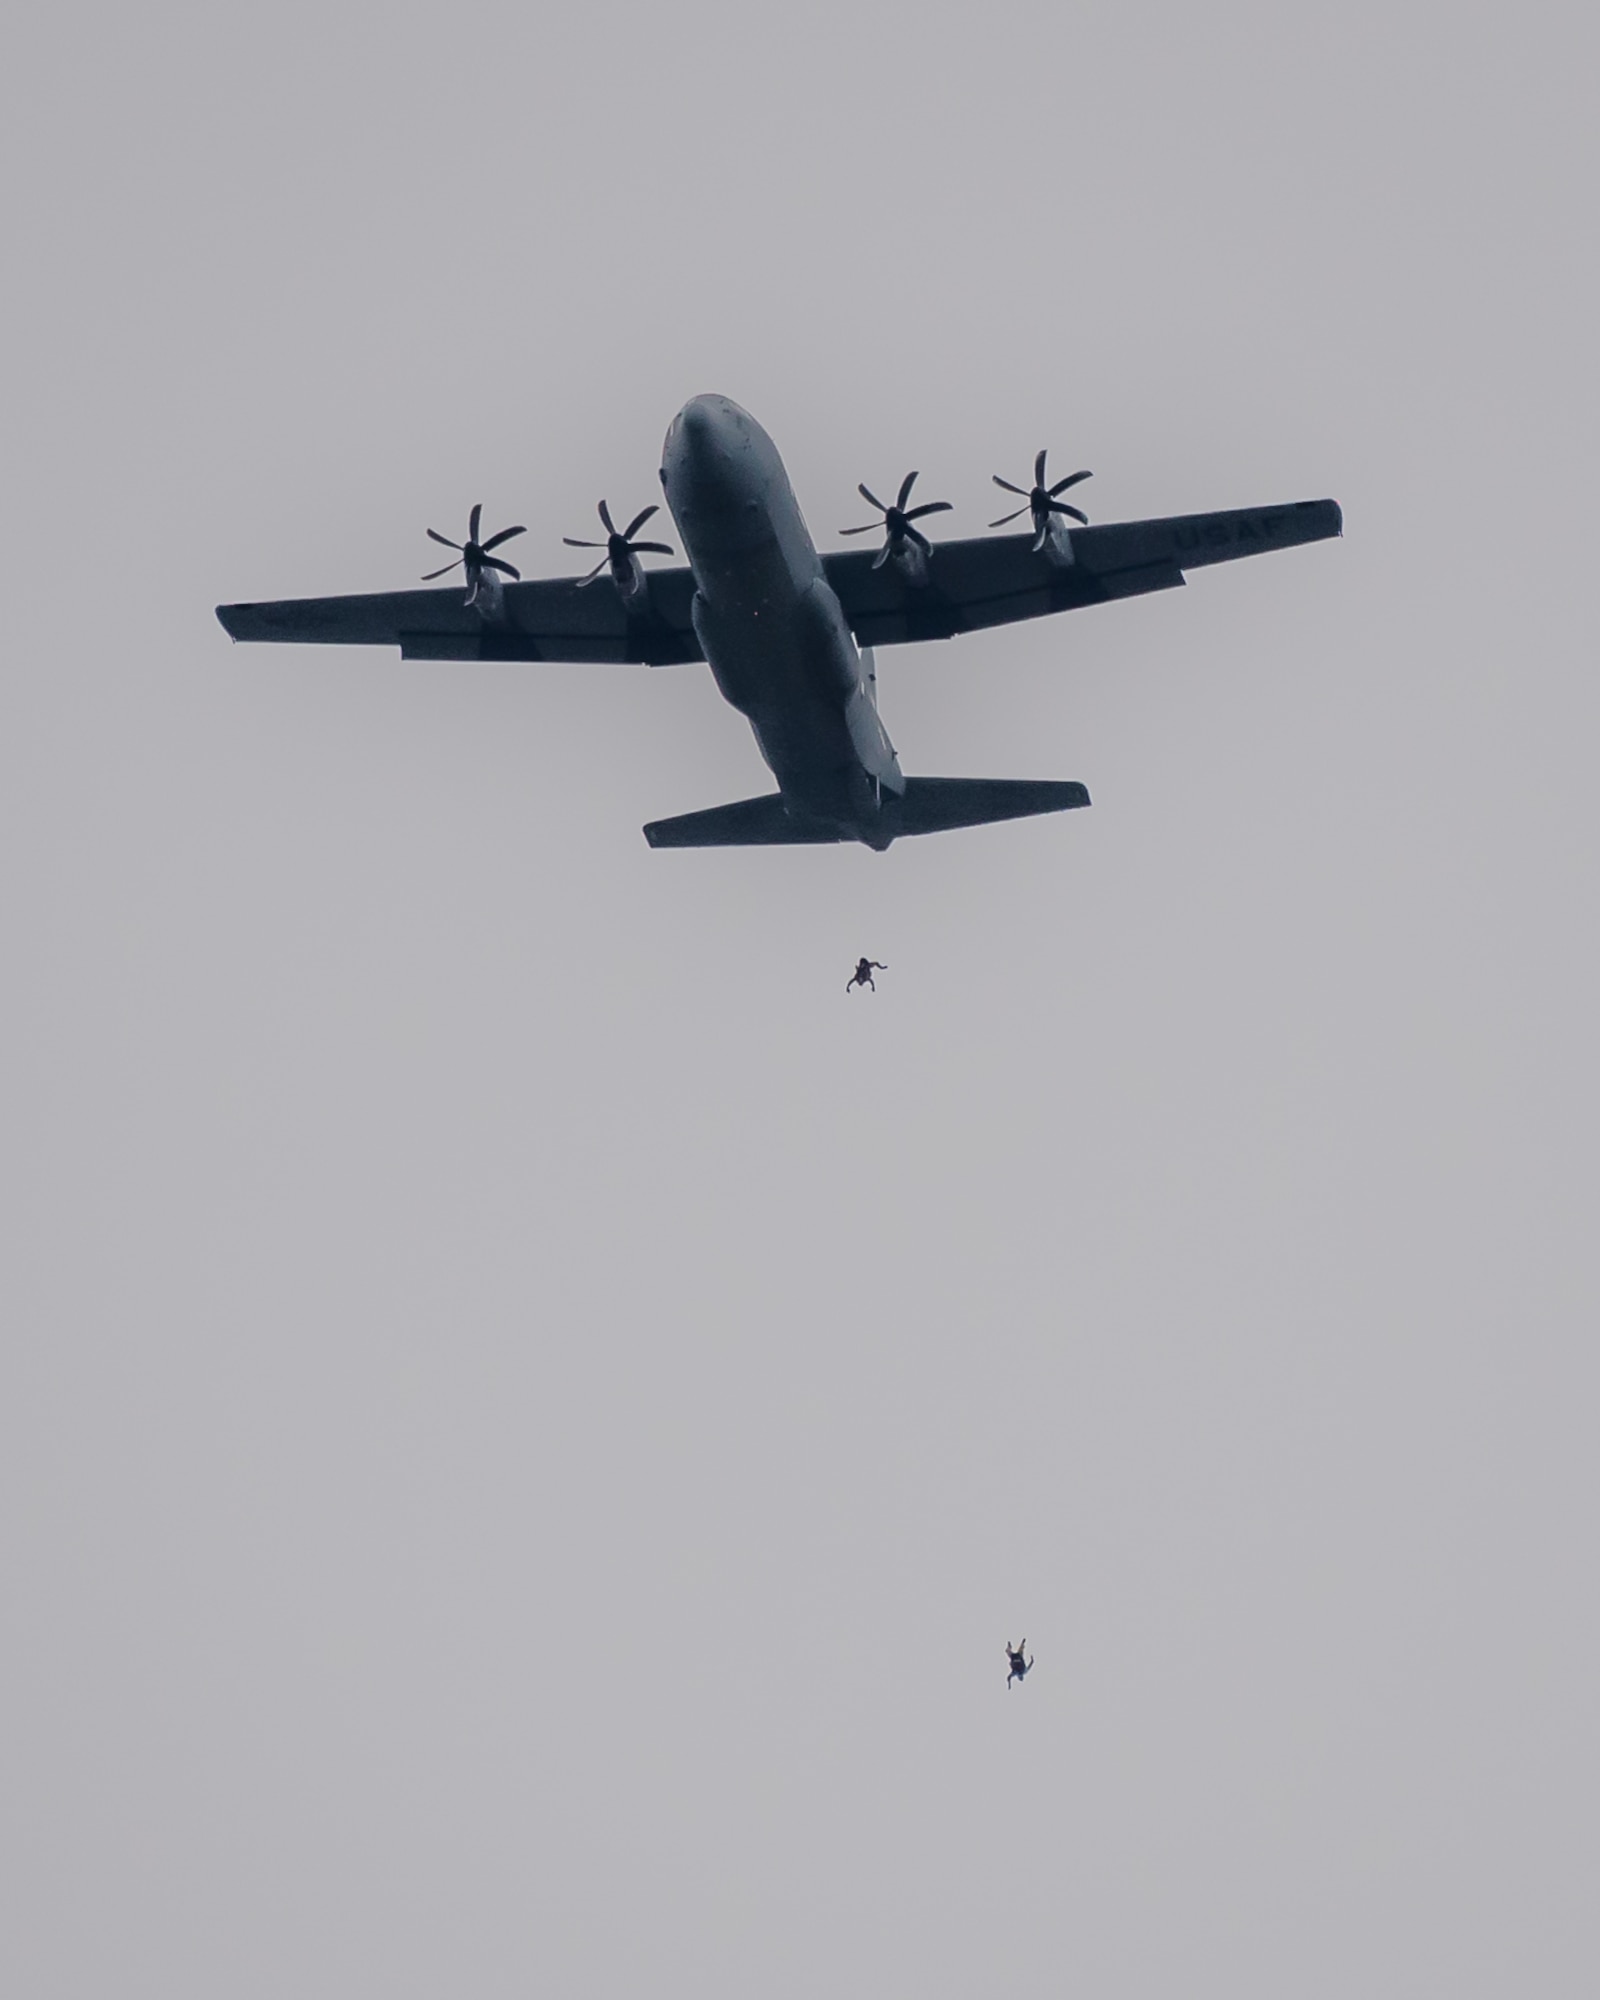 Special Operators from the Kentucky Air National Guard’s 123rd Special Tactics Squadron parachute into the Ohio River from a U.S. Air Force C-130J Hercules aircraft during the annual Thunder Over Louisville airshow in Louisville, Ky., April 13, 2019. Hundreds of thousands of spectators turned out to view the event, which has grown to become one of the largest single-day air shows in North America. (U.S. Air National Guard photo by Dale Greer)